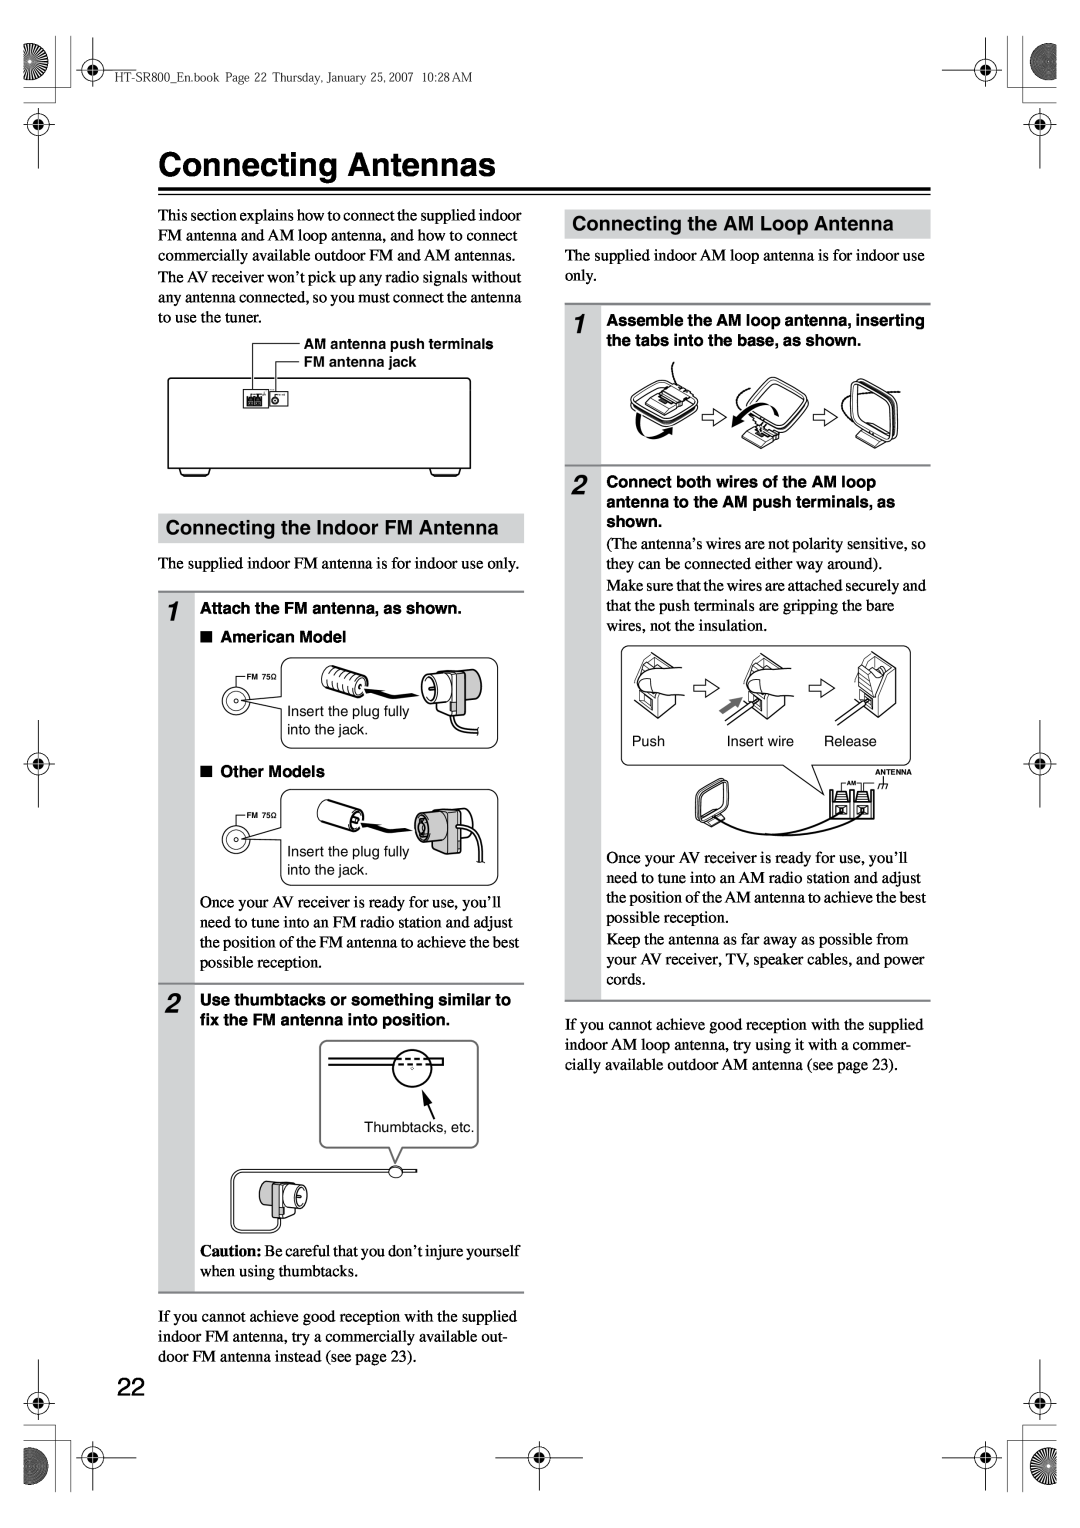 Onkyo HT-SR800 instruction manual Connecting Antennas, Connecting the AM Loop Antenna, Connecting the Indoor FM Antenna 